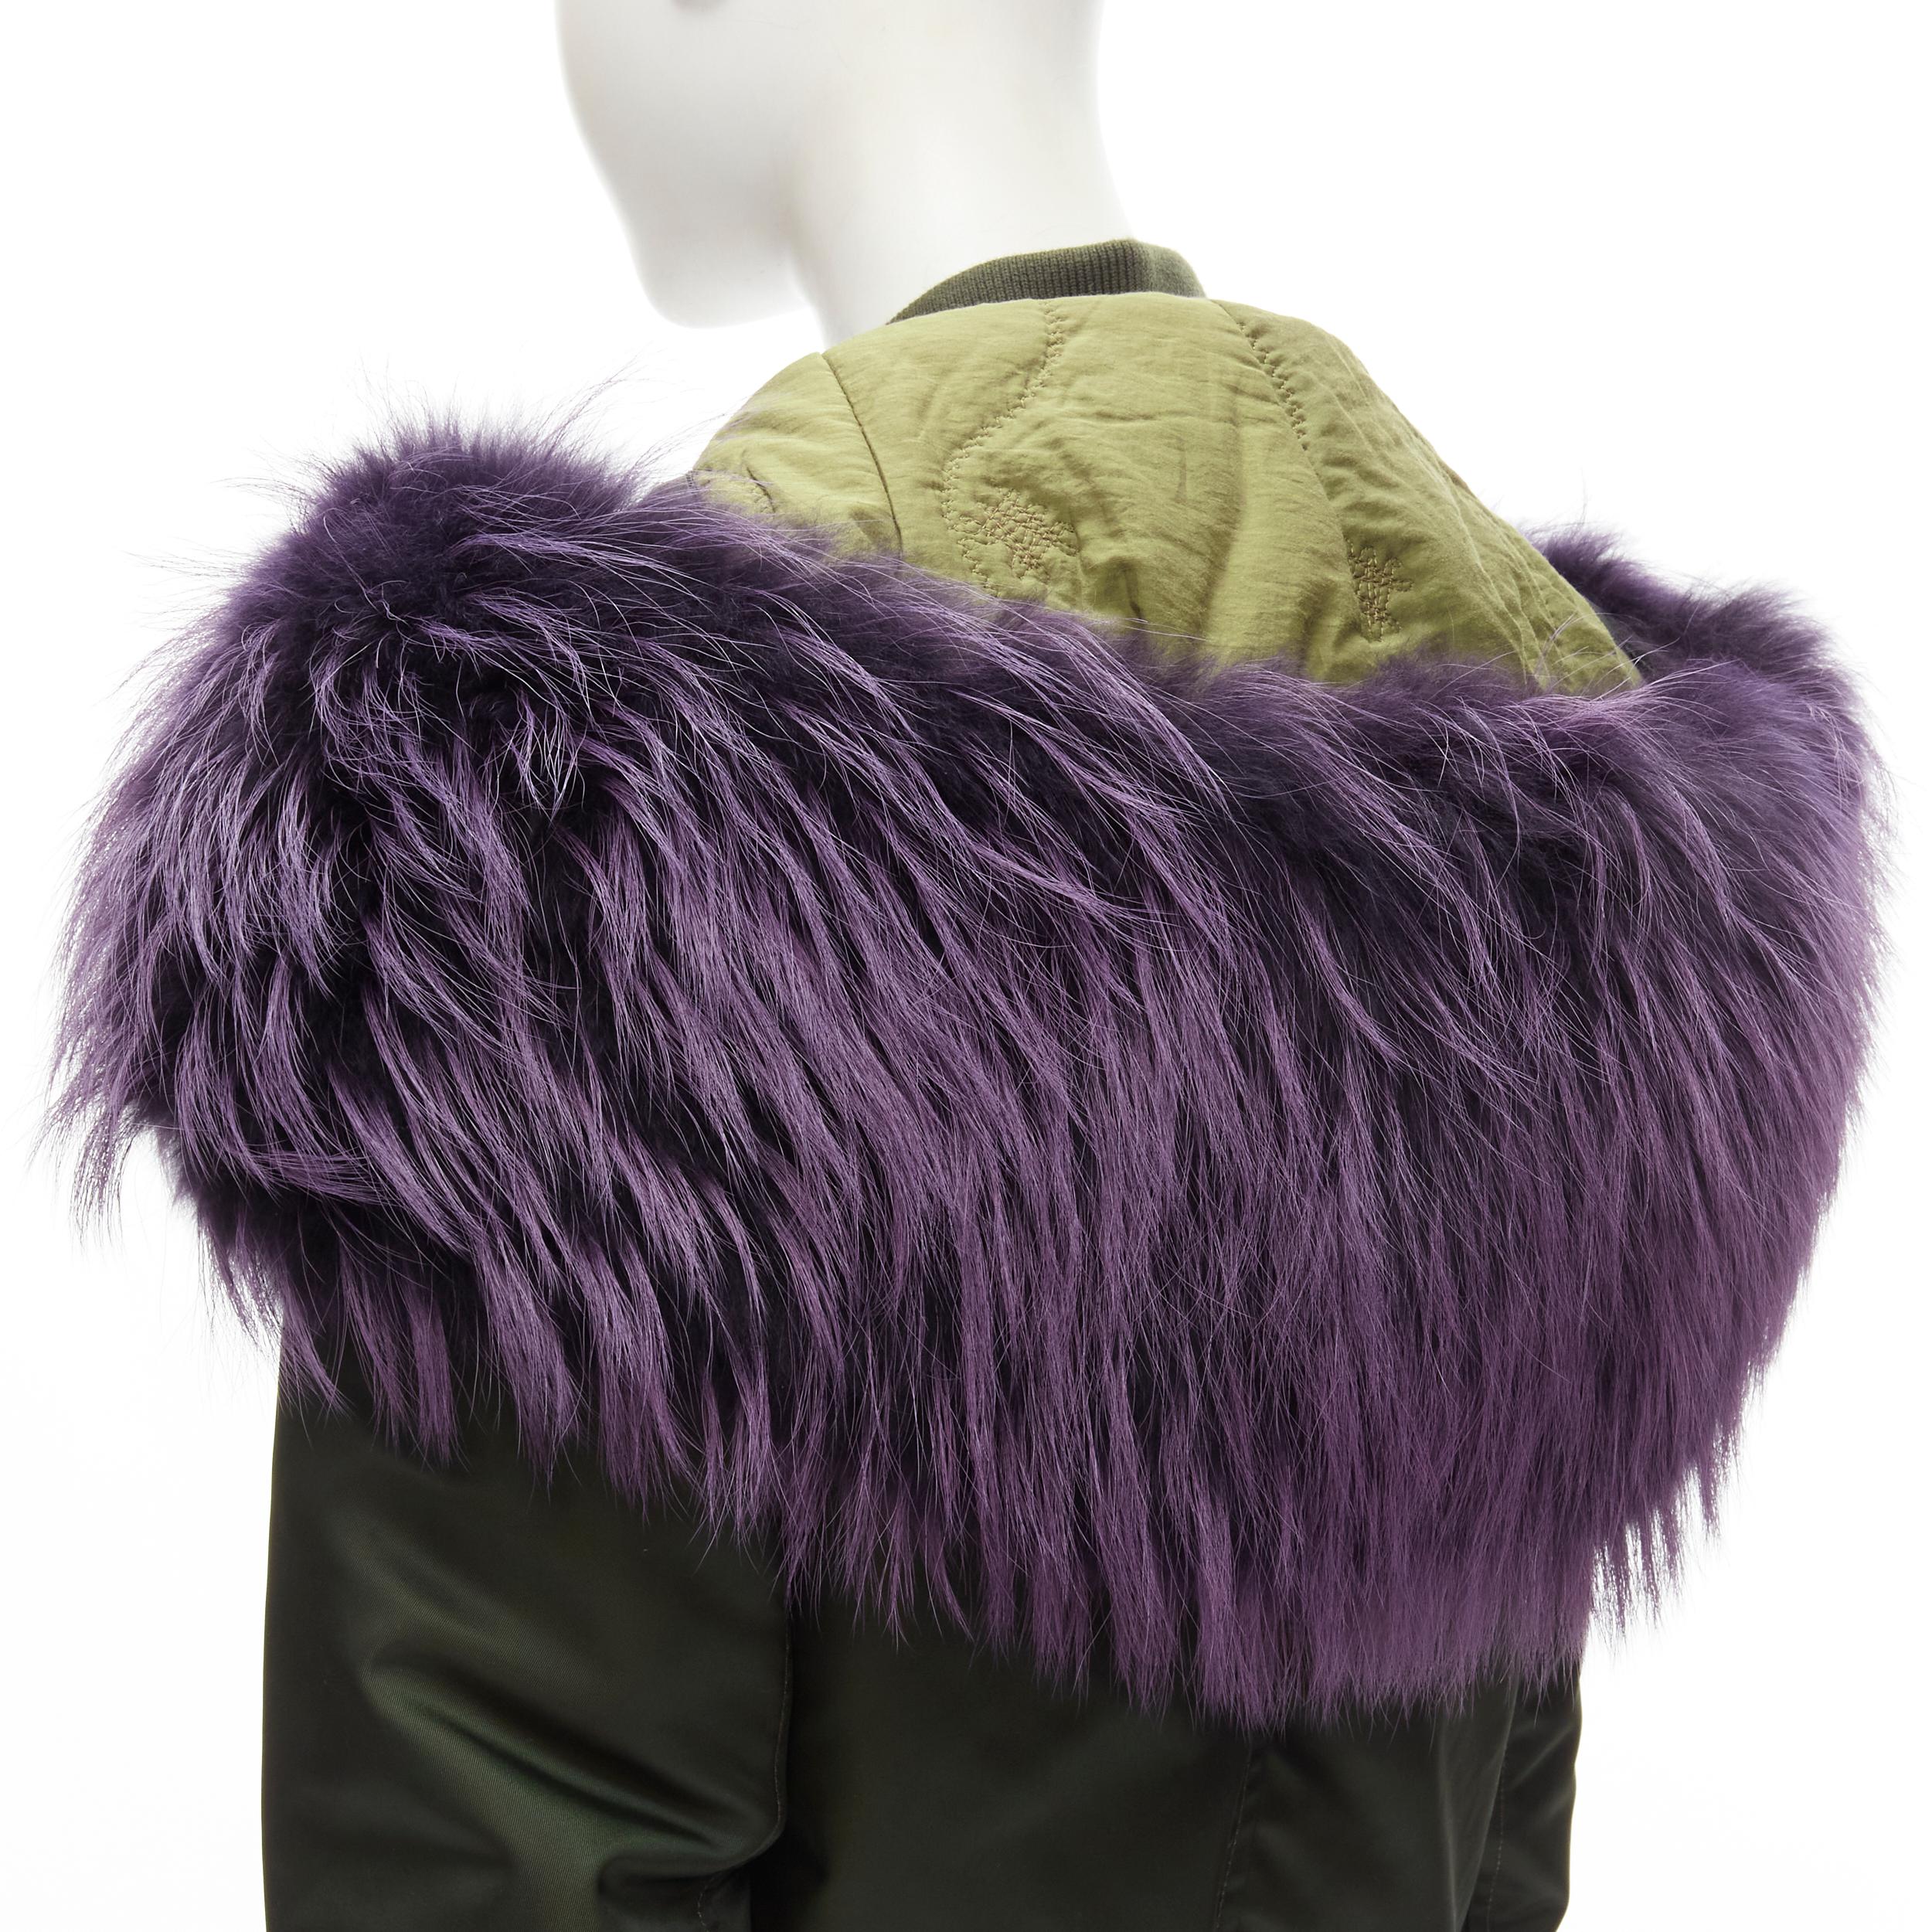 MR AND MRS ITALY green nylon purple fox fur fully lined MA-1 bomber jacket XS
Brand: Mr and Mrs Italy
Material: Nylon
Color: Green
Pattern: Solid
Closure: Zip
Extra Detail: Purple dyed genuine fox lining and fur trimmed hood. Fur trim may be